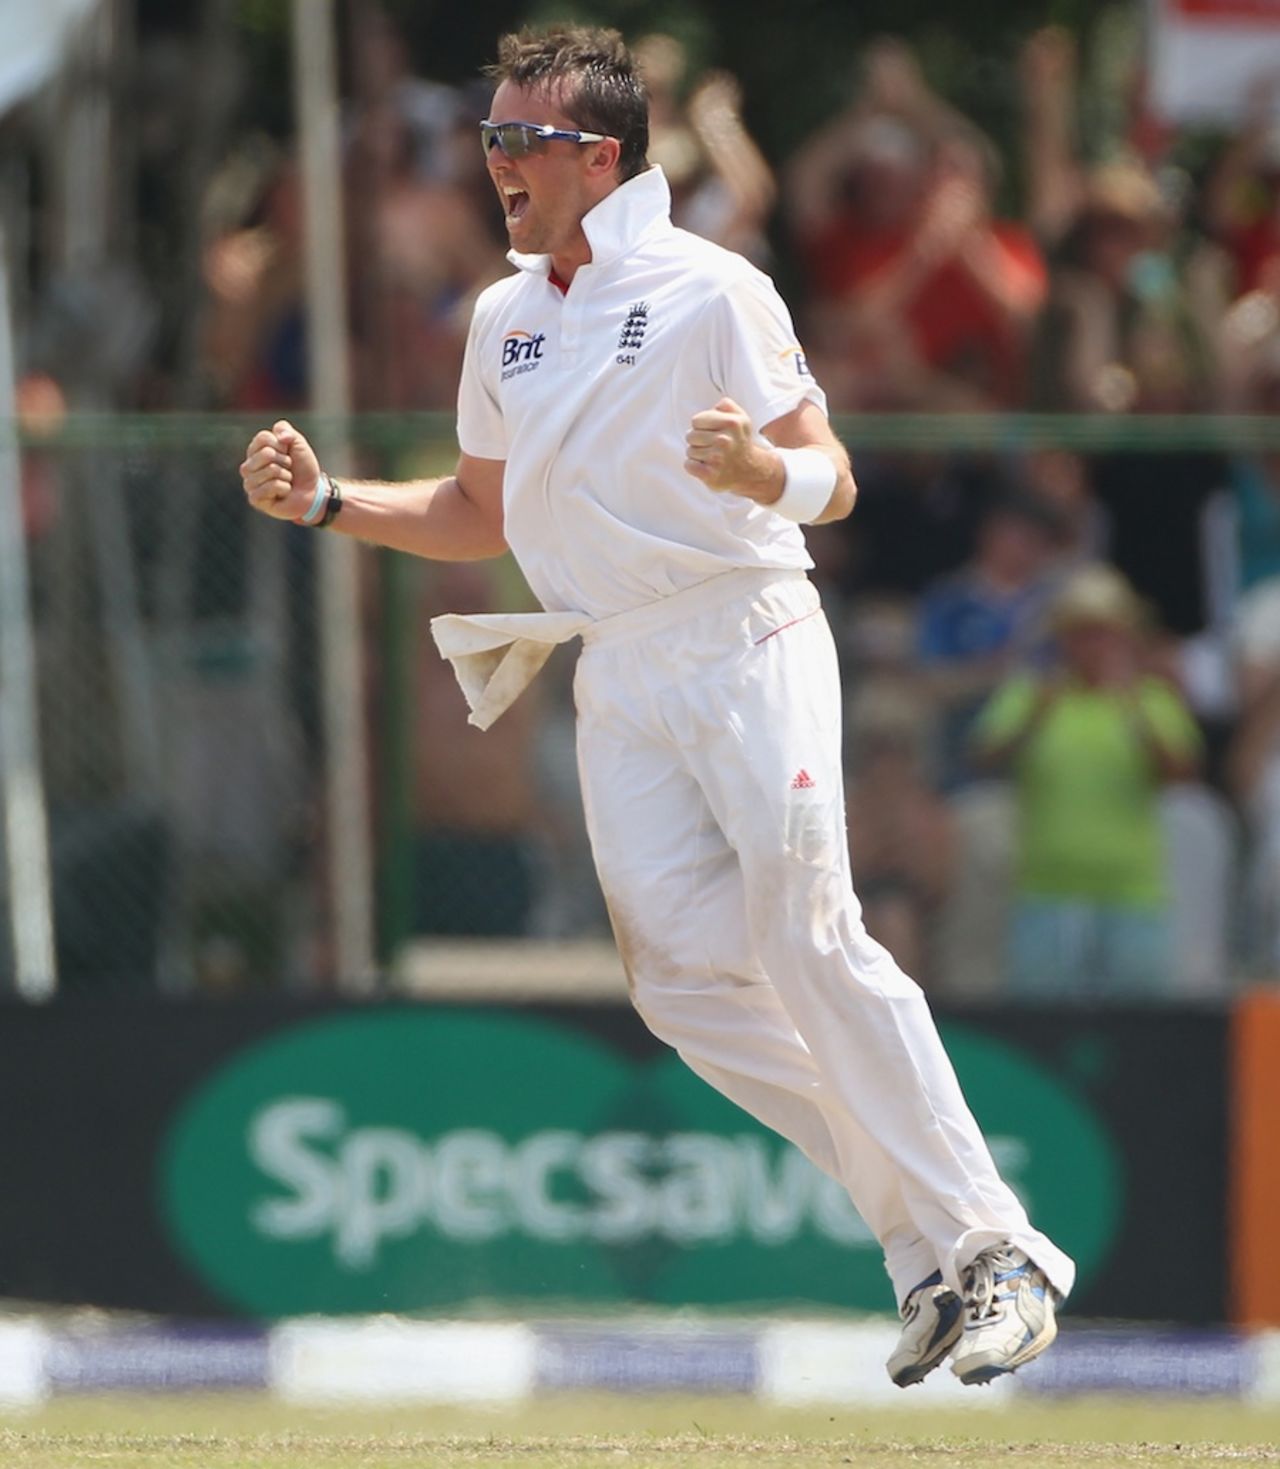 Graeme Swann picked up his 13th five-wicket haul, Sri Lanka v England, 2nd Test, Colombo, P Sara Oval, 5th day, April 7, 2012